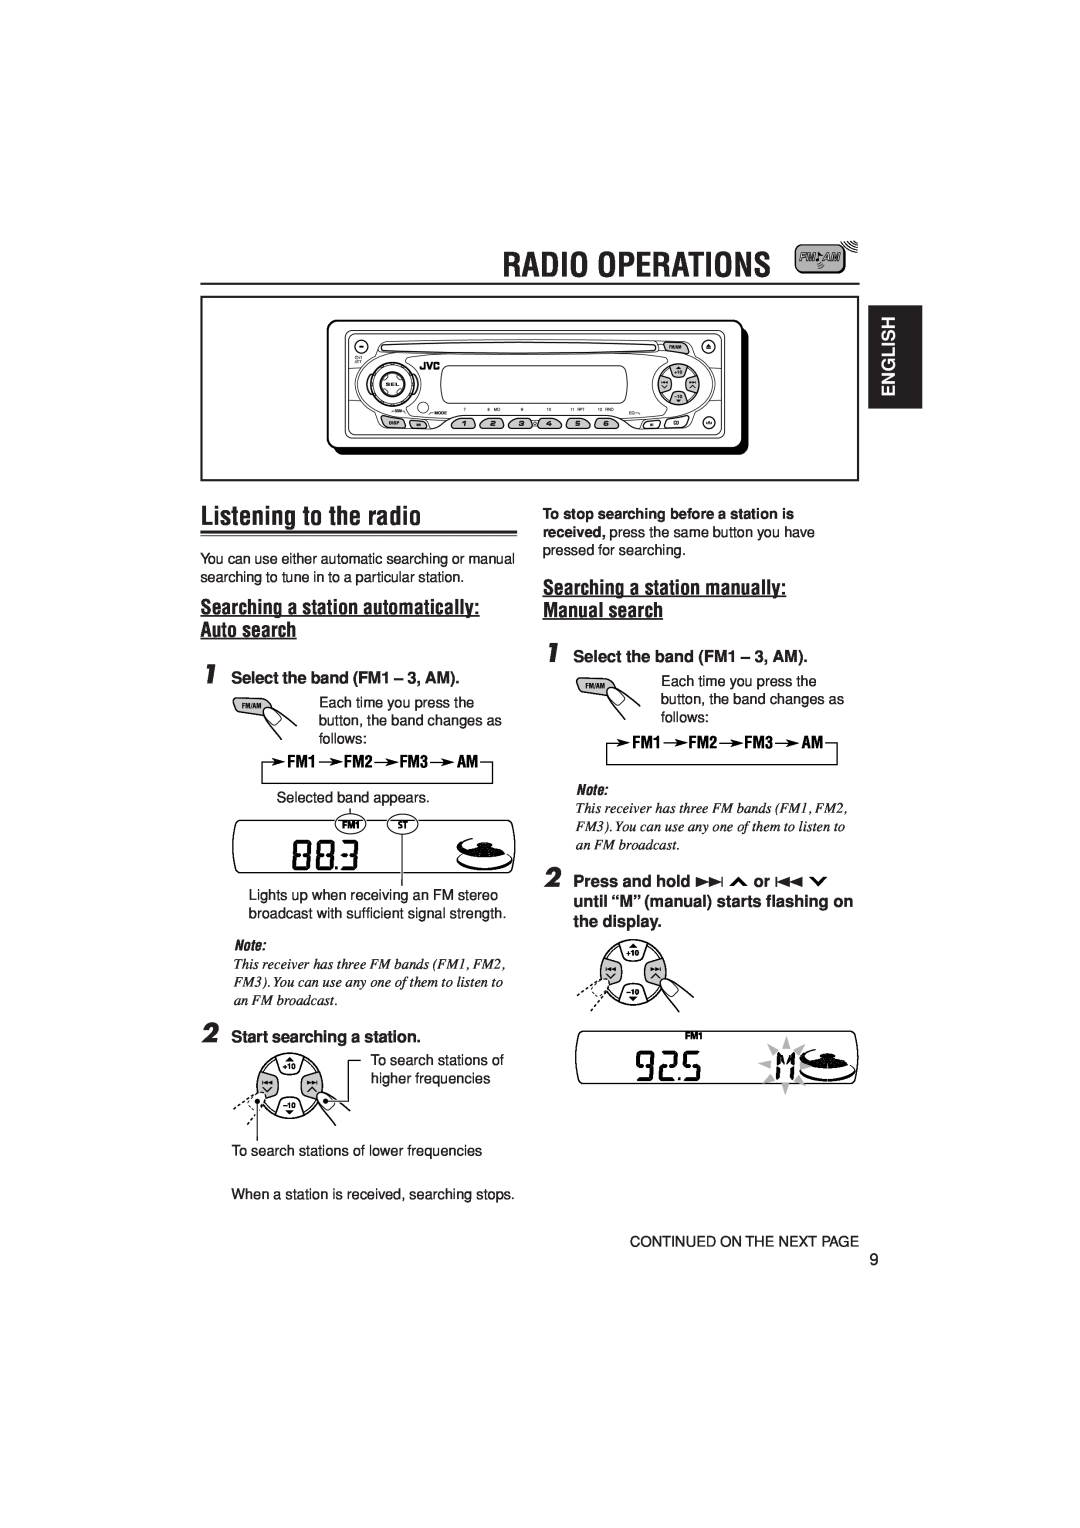 JVC KD-S20 manual Radio Operations, Listening to the radio, Searching a station automatically Auto search, English 